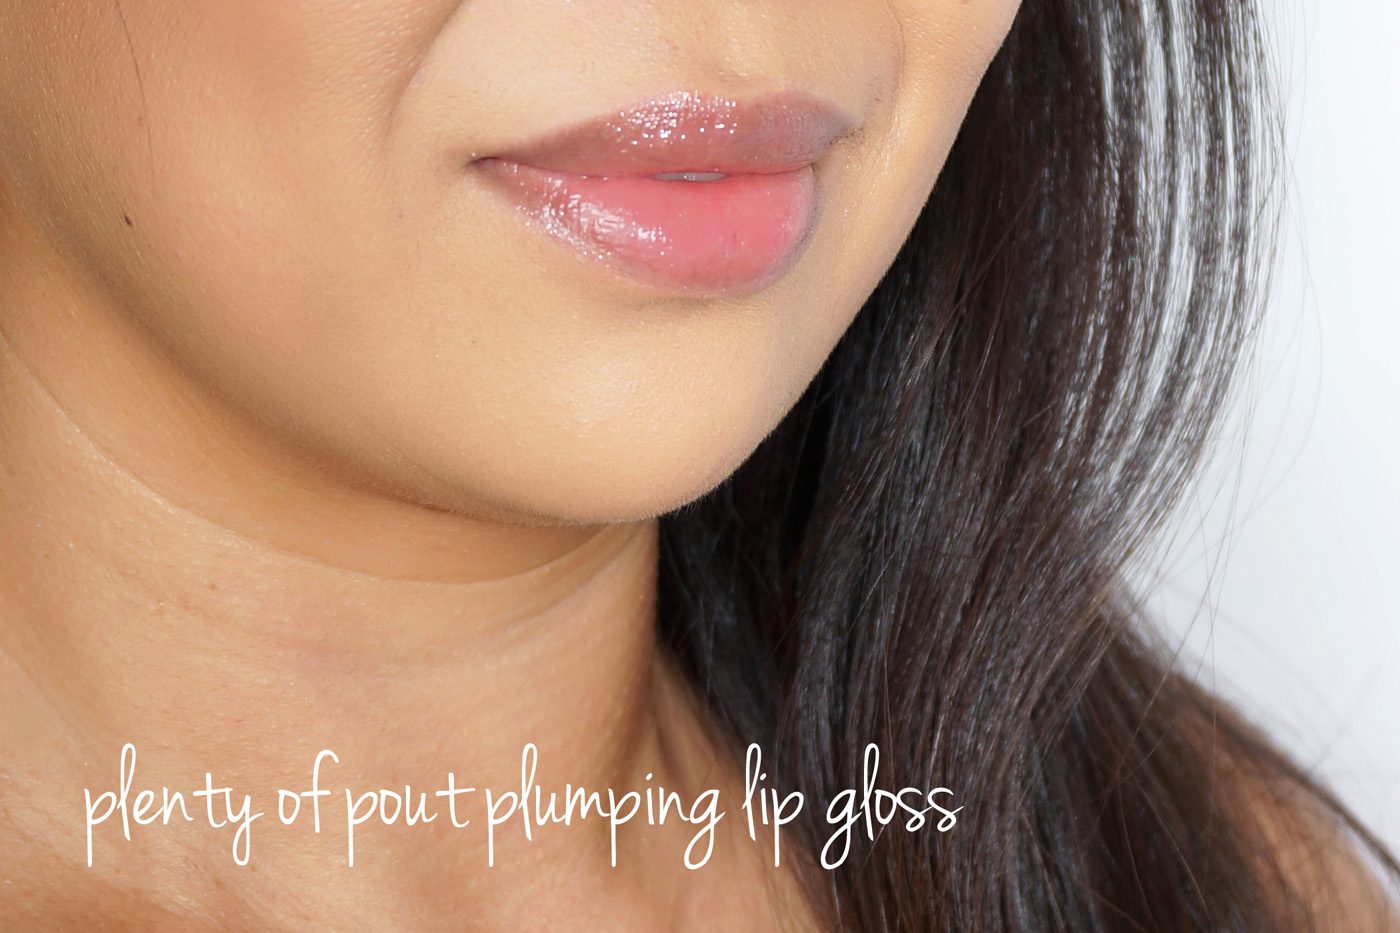 MAC Plenty of Pout Plumping Lip Gloss swatches | The Beauty Look Book